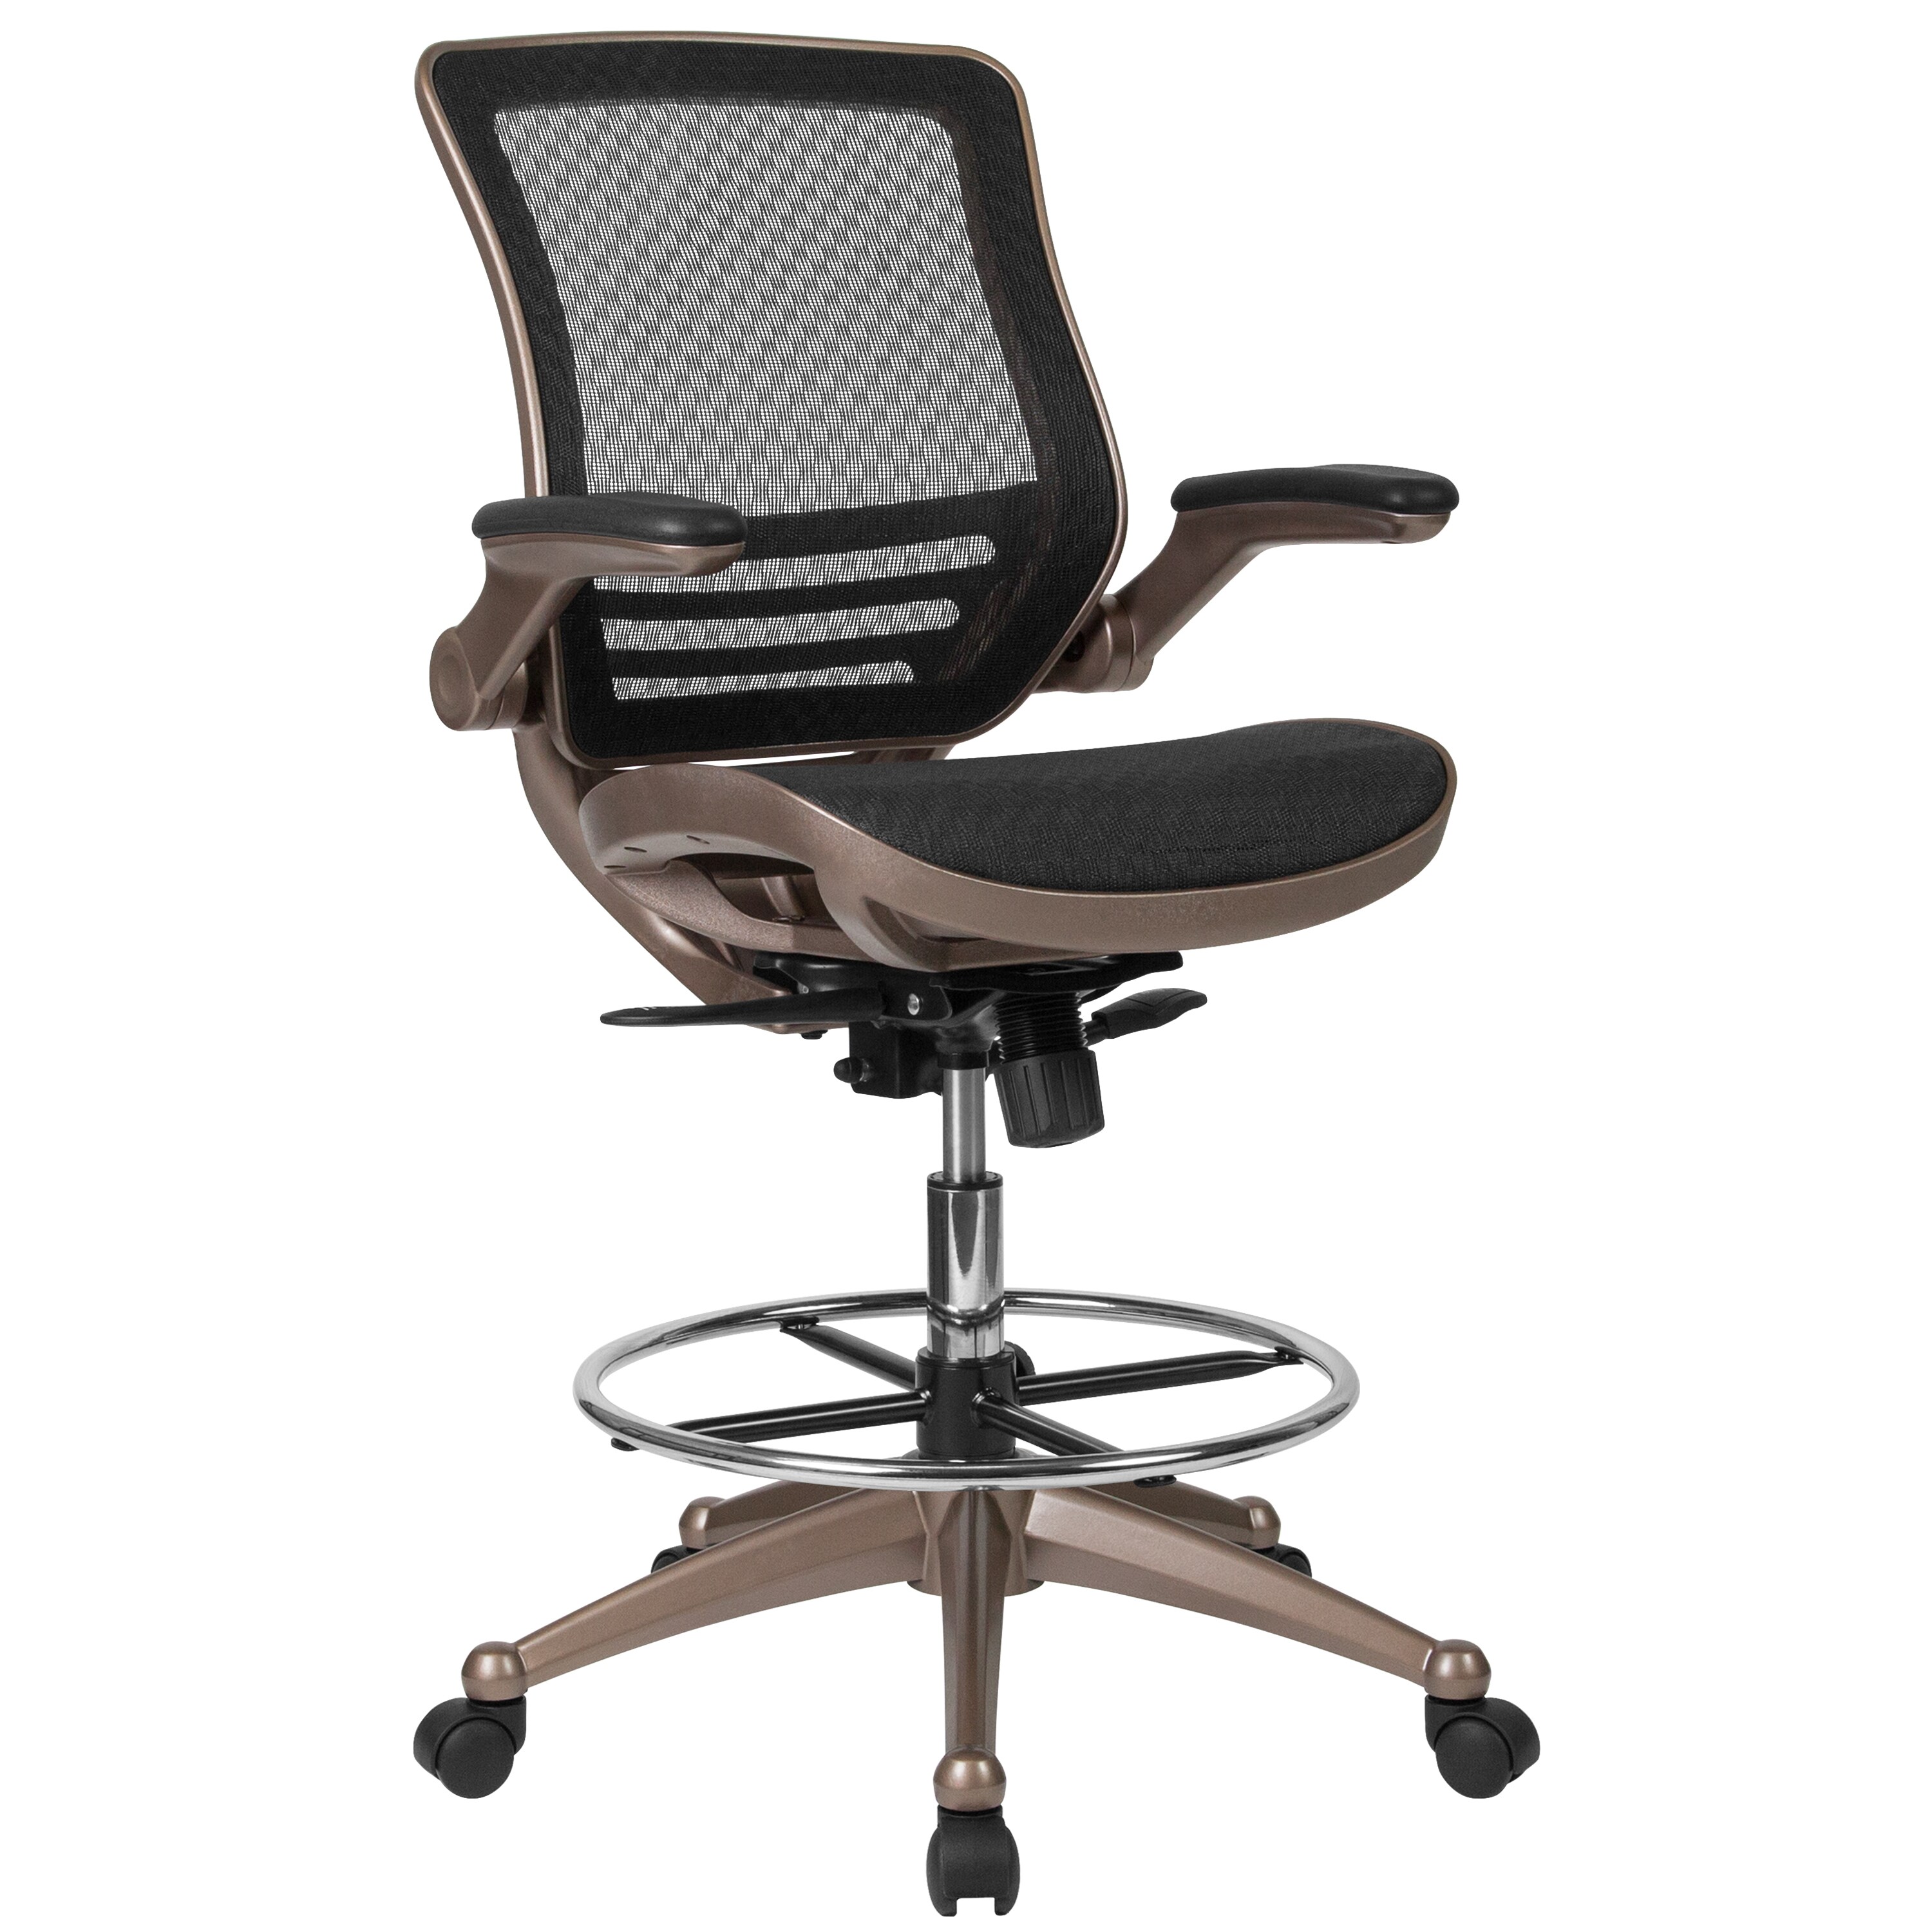 Modern Designer Ergonomic Office Drafting Chair Low Back With Arms & Foot Rest 